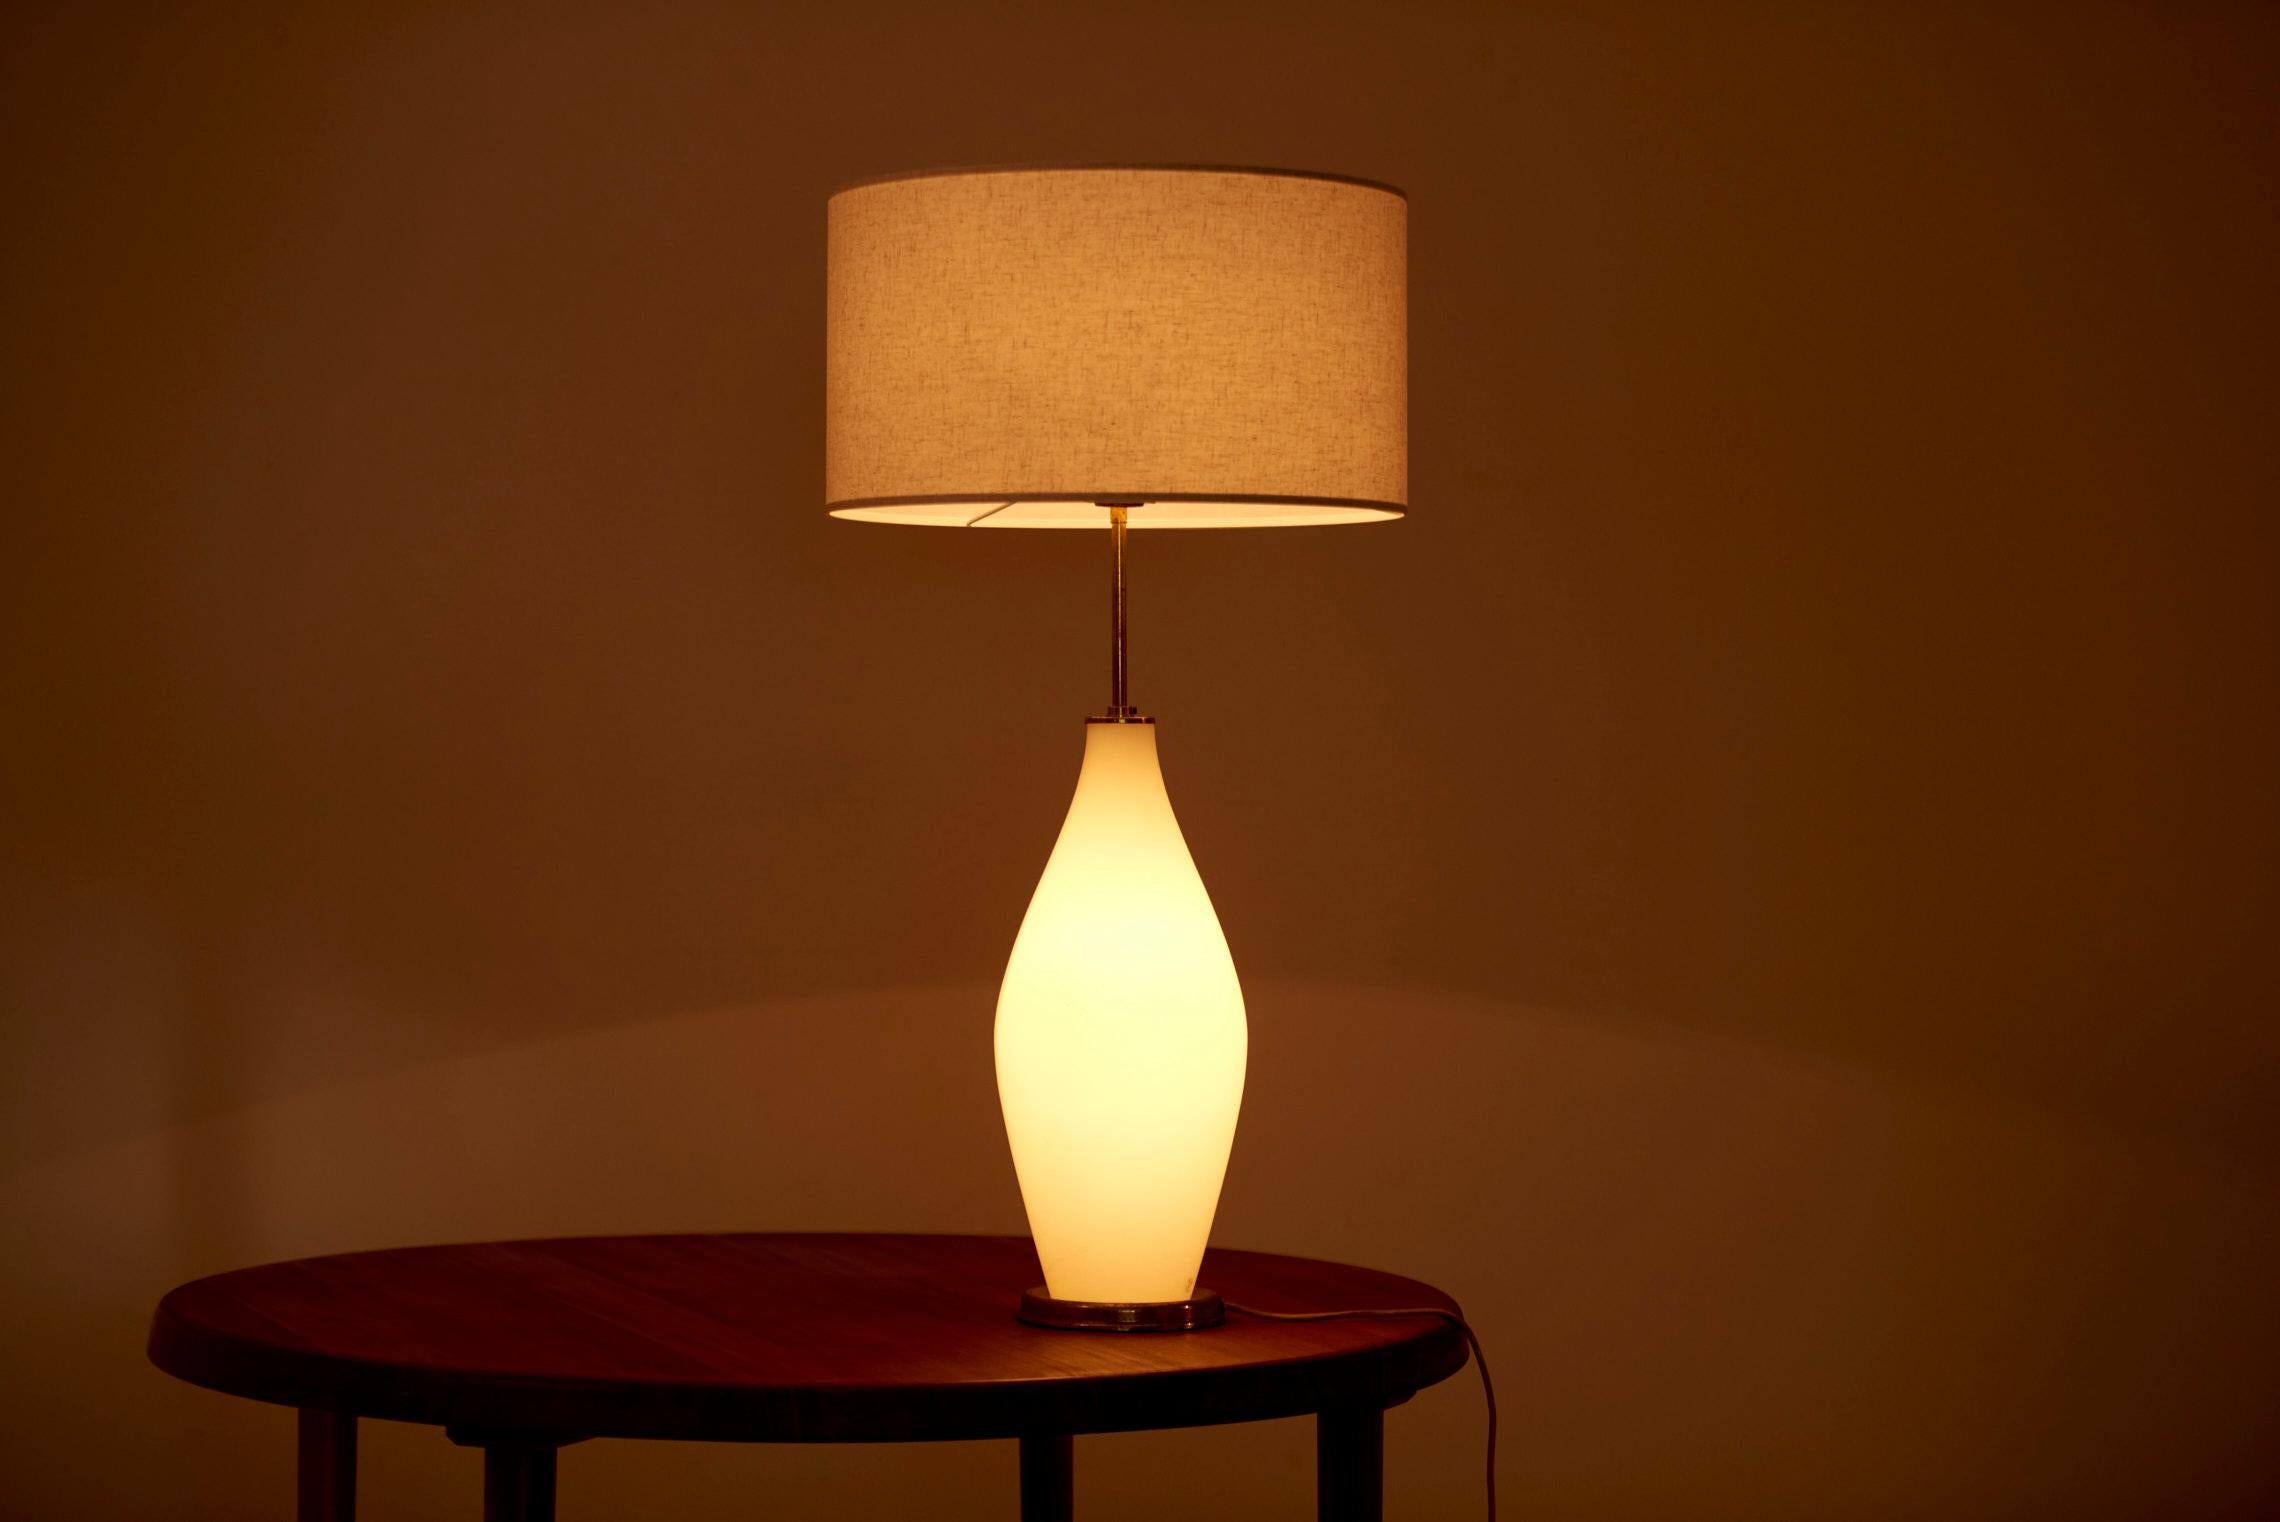 Aloys Gangkofner granada table lamp for Peill & Putzler, Germany 1960s, 1xE27. The measurements apply to the base, the lamp comes without the shade. Please note: Lamp should be fitted professionally in accordance to local requirements.